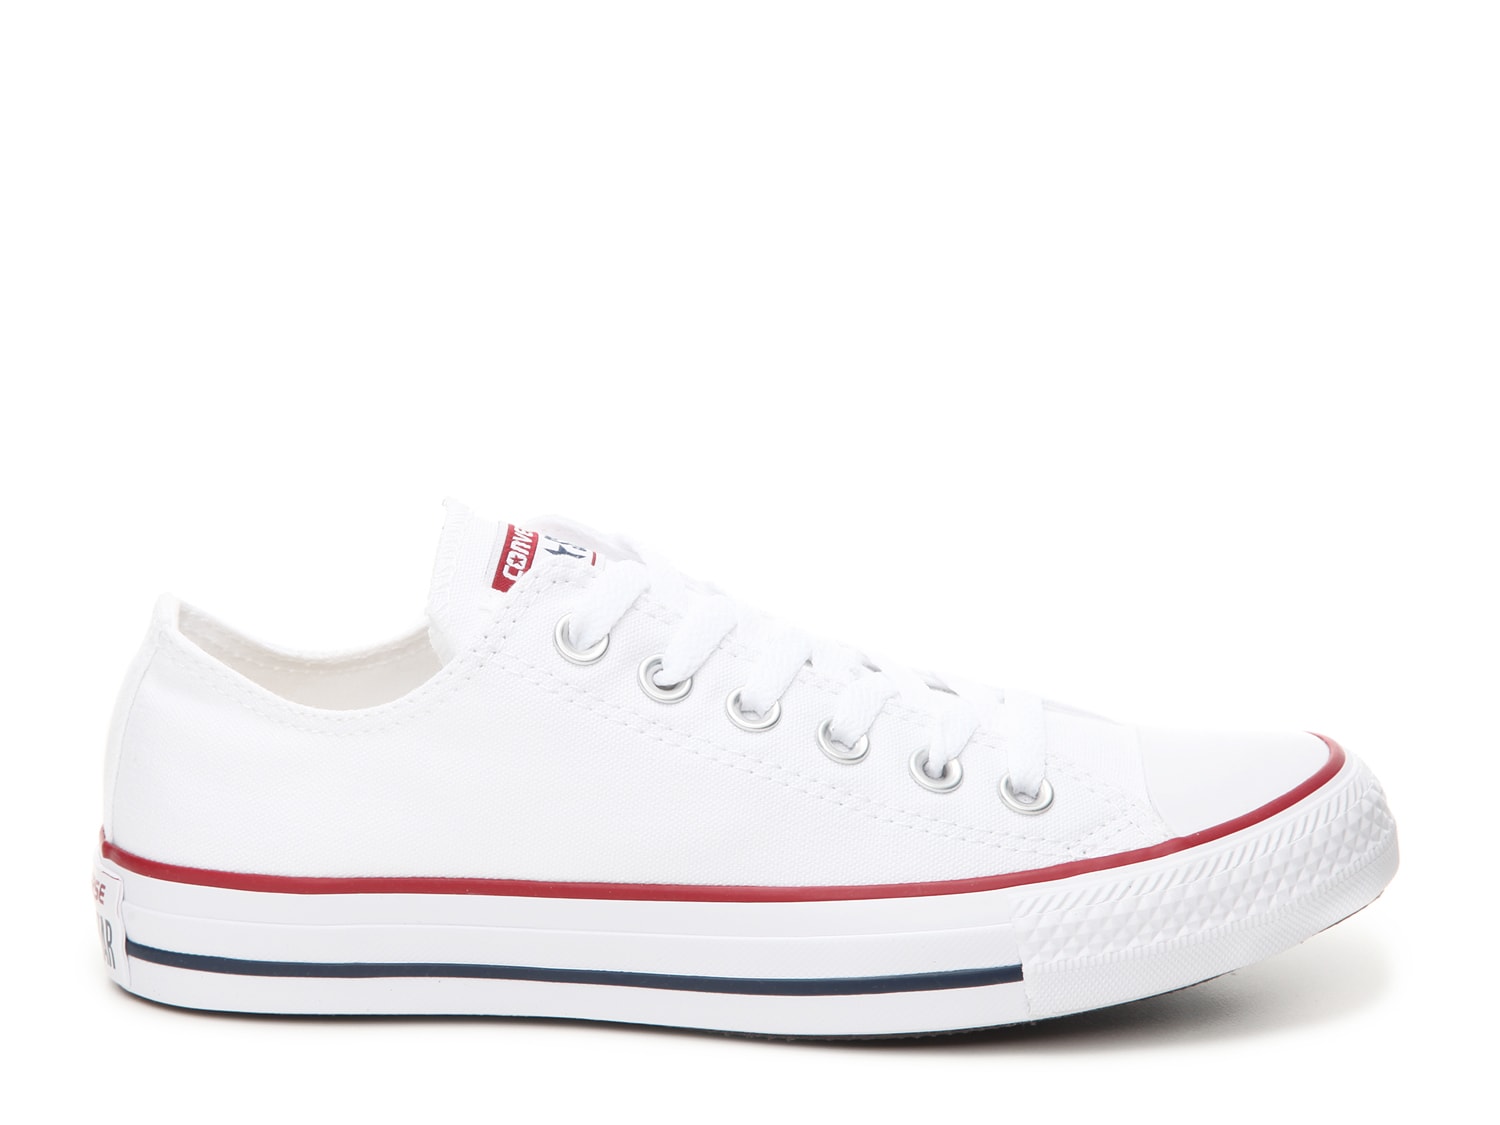 cheapest place to buy chuck taylors